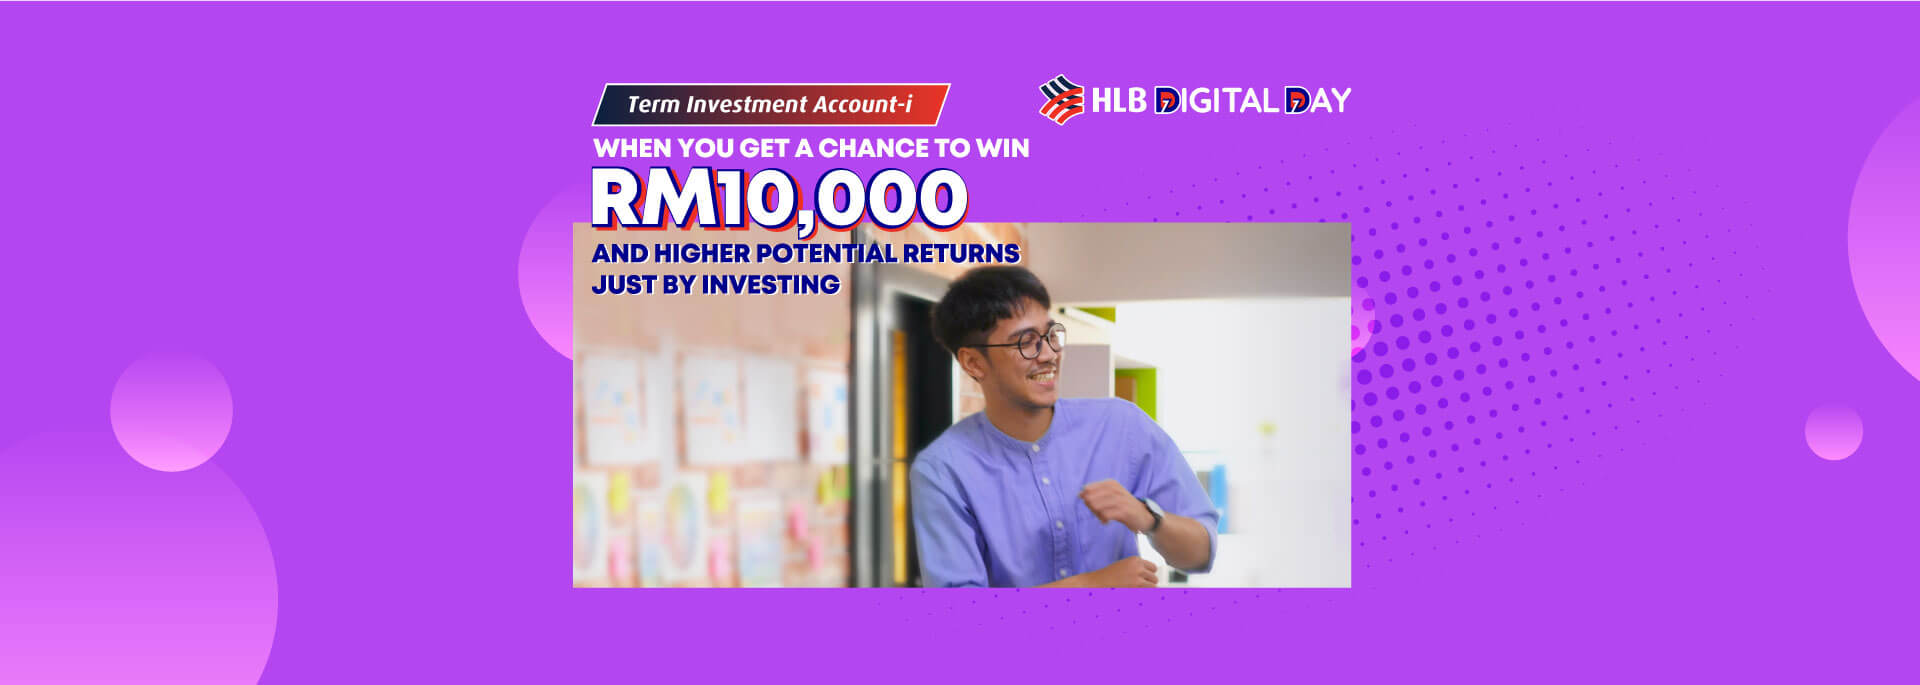 Term Investment Account-i when you get a chance to win RM10,000